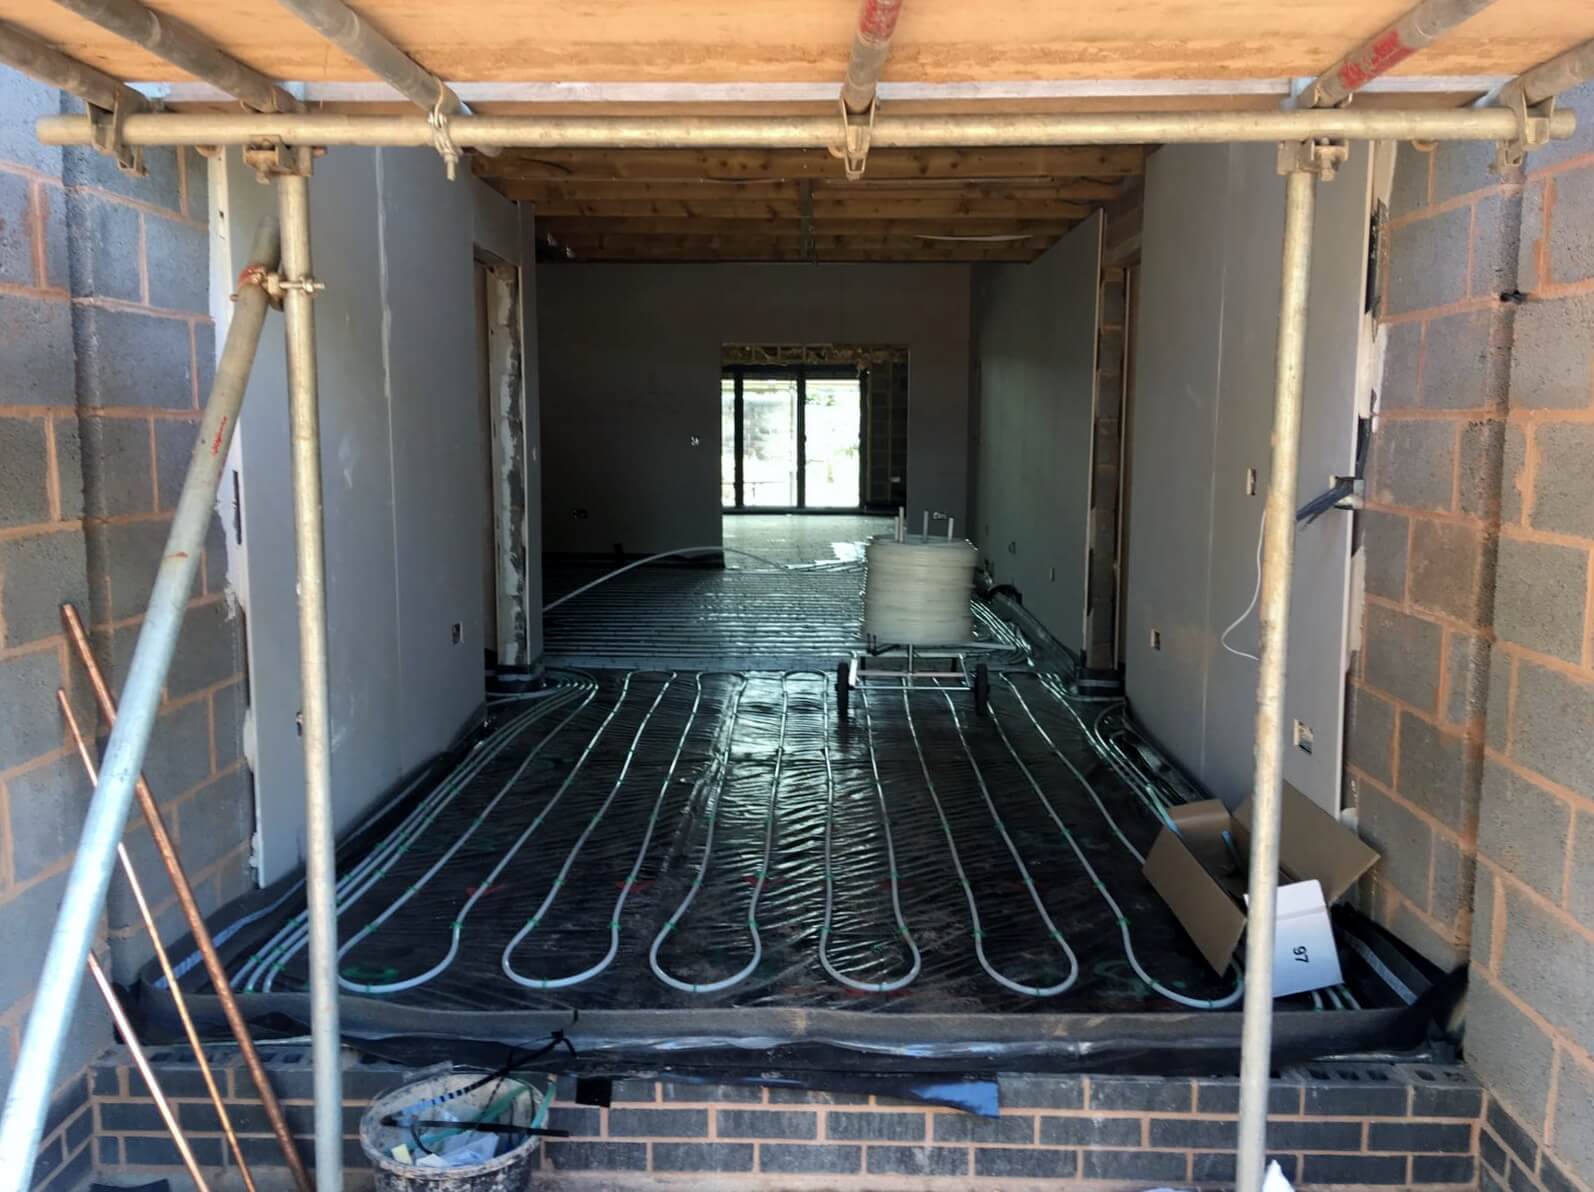 Underfloor heating system with a layer of self levelling screed applied in background